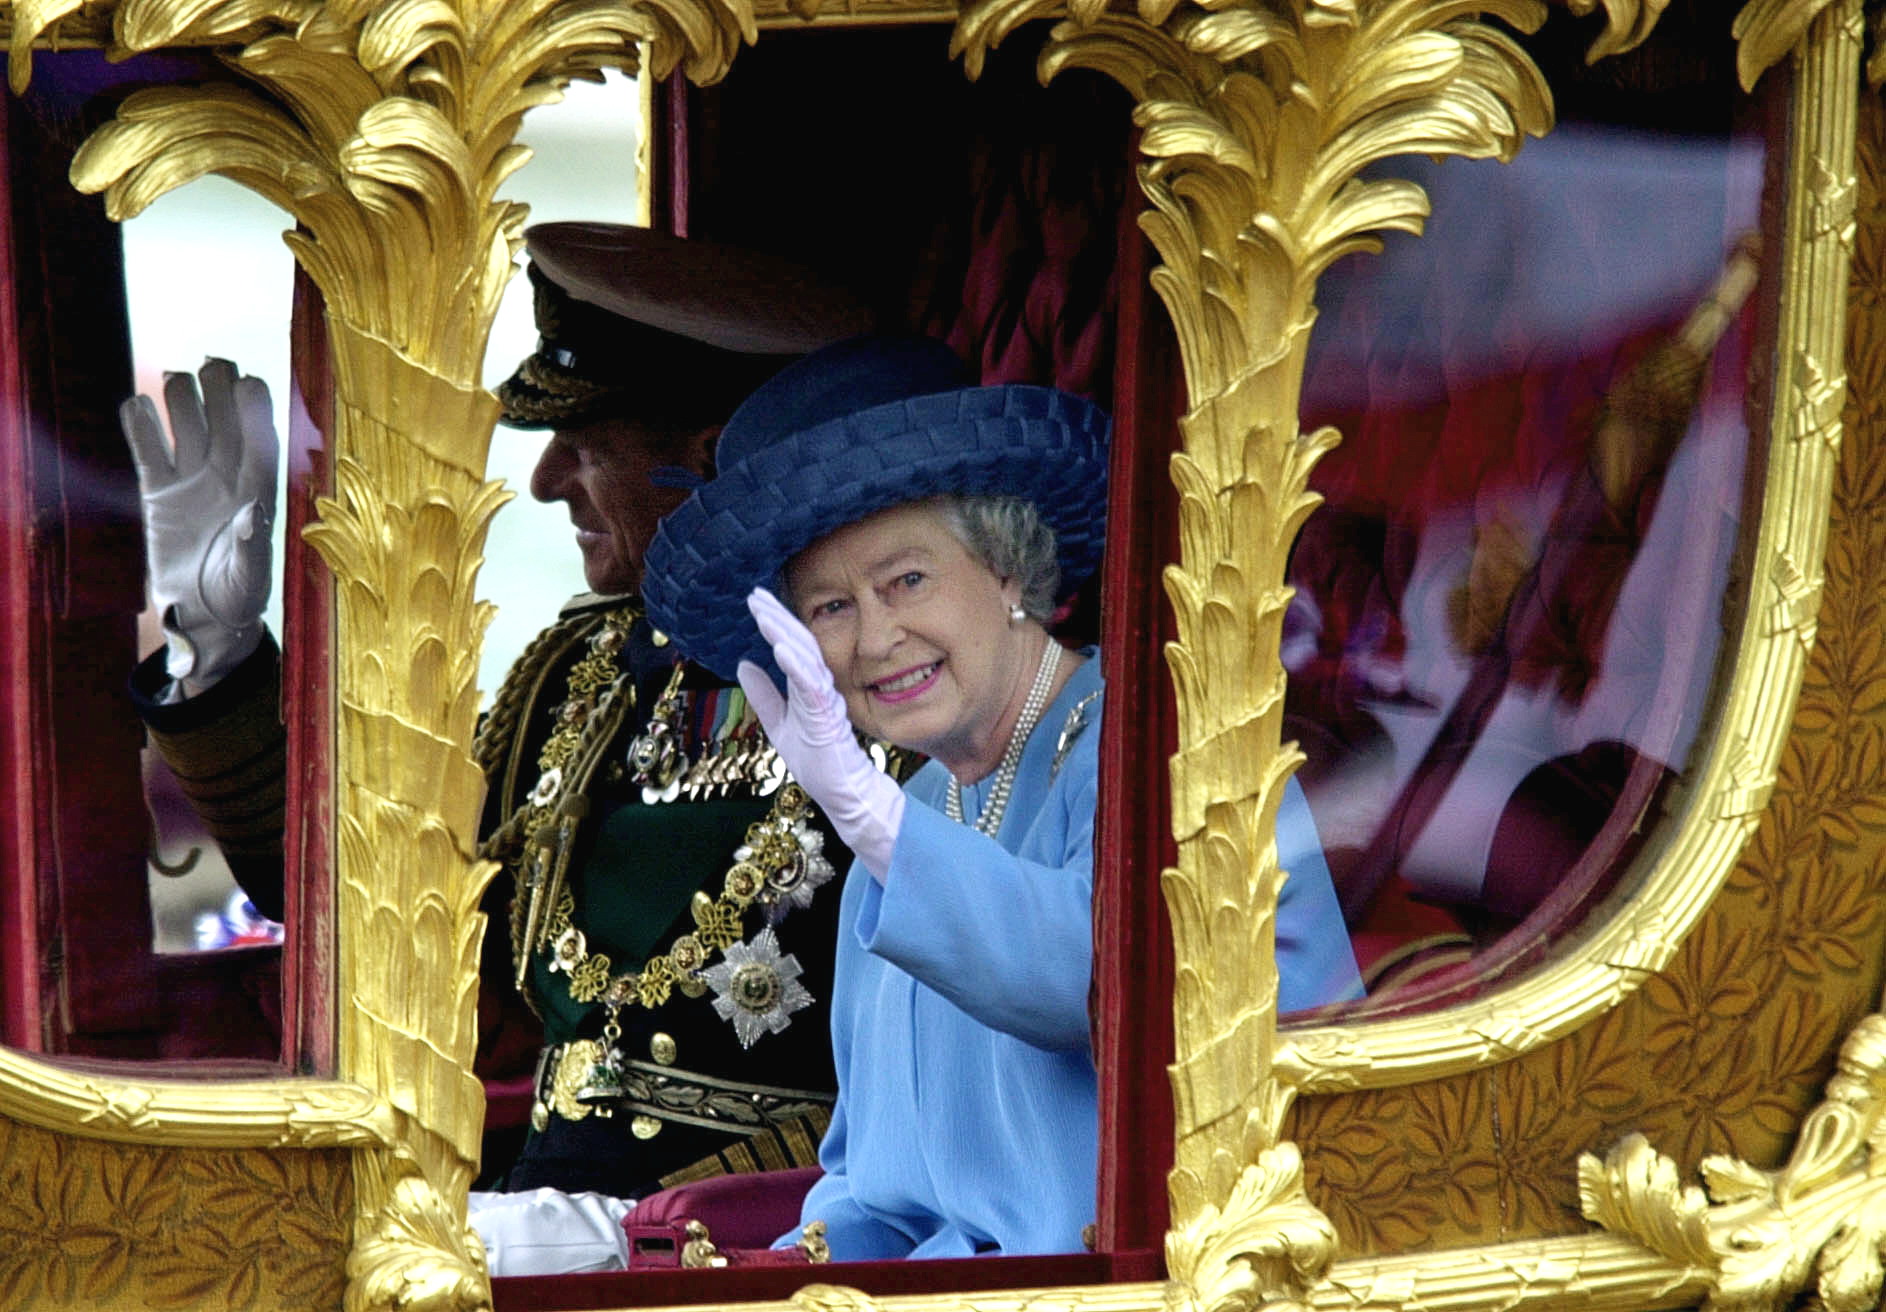 <p>Queen Elizabeth II waved to the crowds with husband Prince Philip by her side as they rode in the Gold State Coach during a procession from Buckingham Palace to St. Paul's Cathedral in London to attend a thanksgiving service to mark her Golden Jubilee -- 50 years on the throne -- on June 4, 2002. </p>